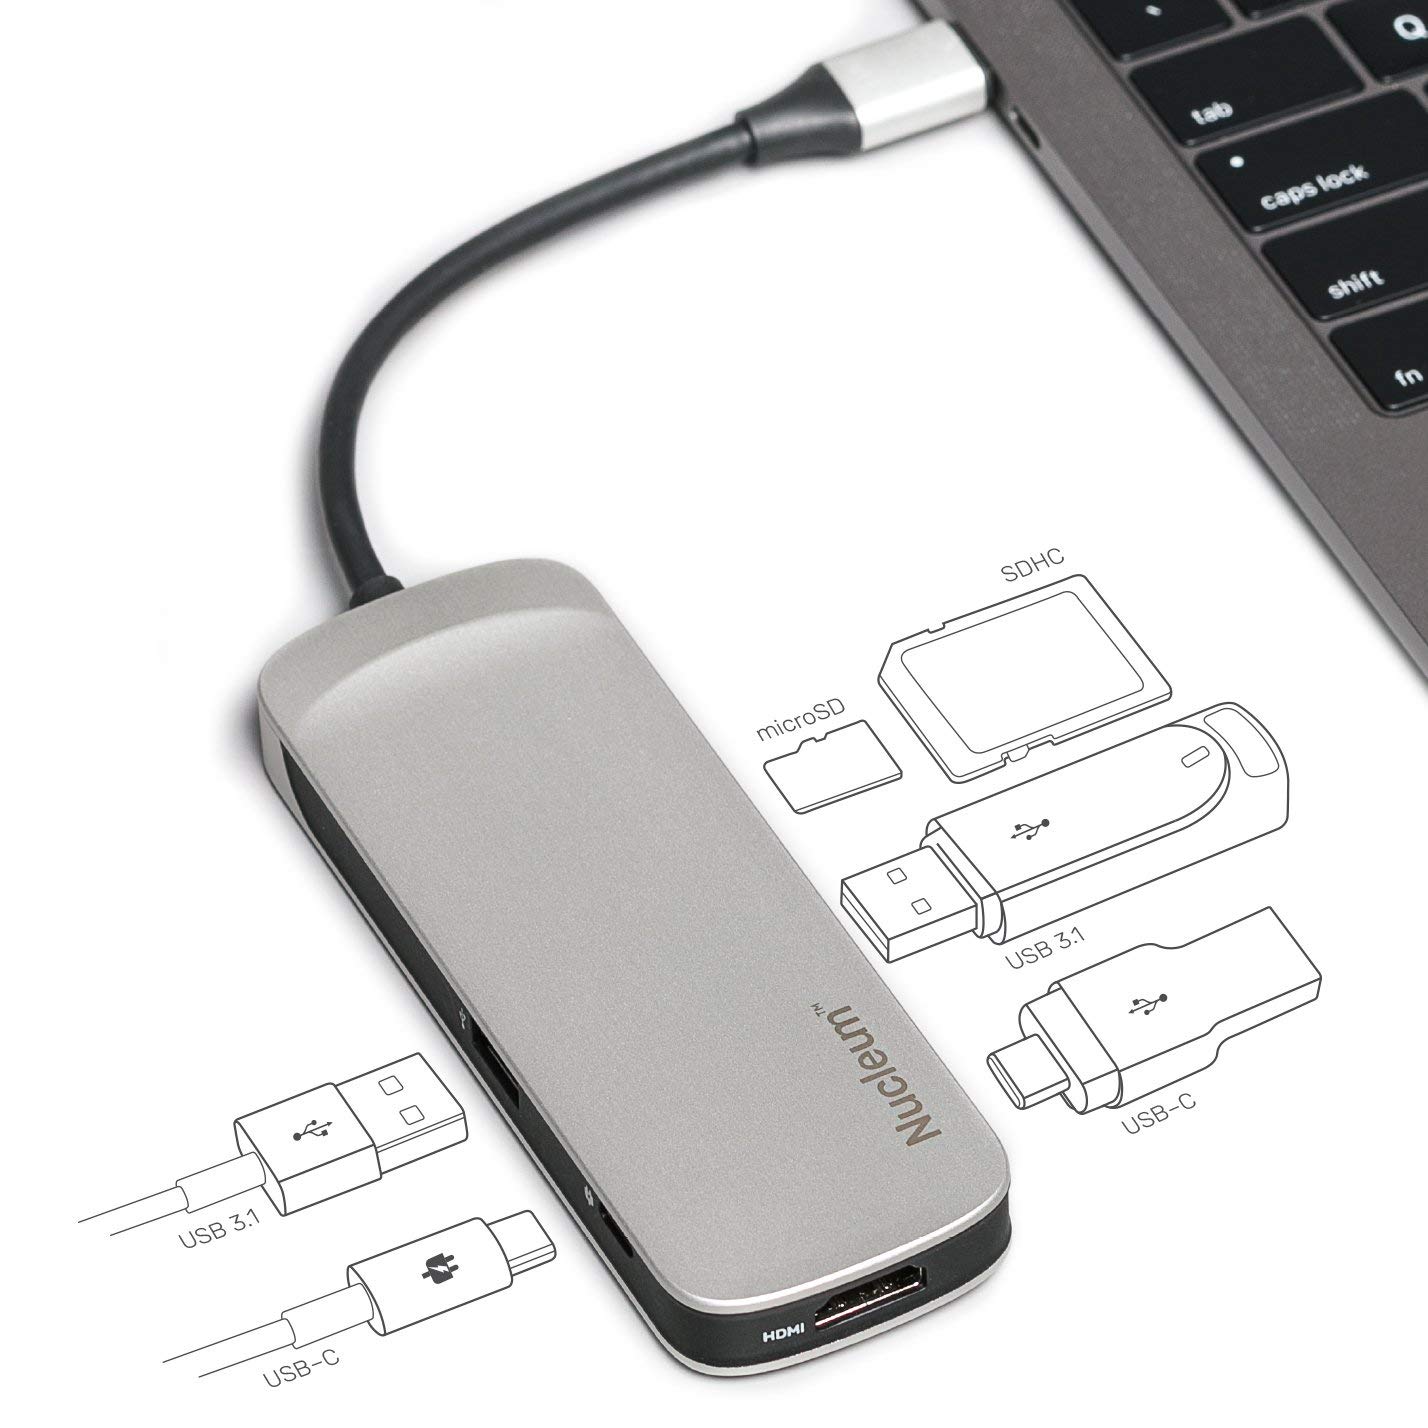 Yes! The Kingston Nucleum USB-C hub just works.